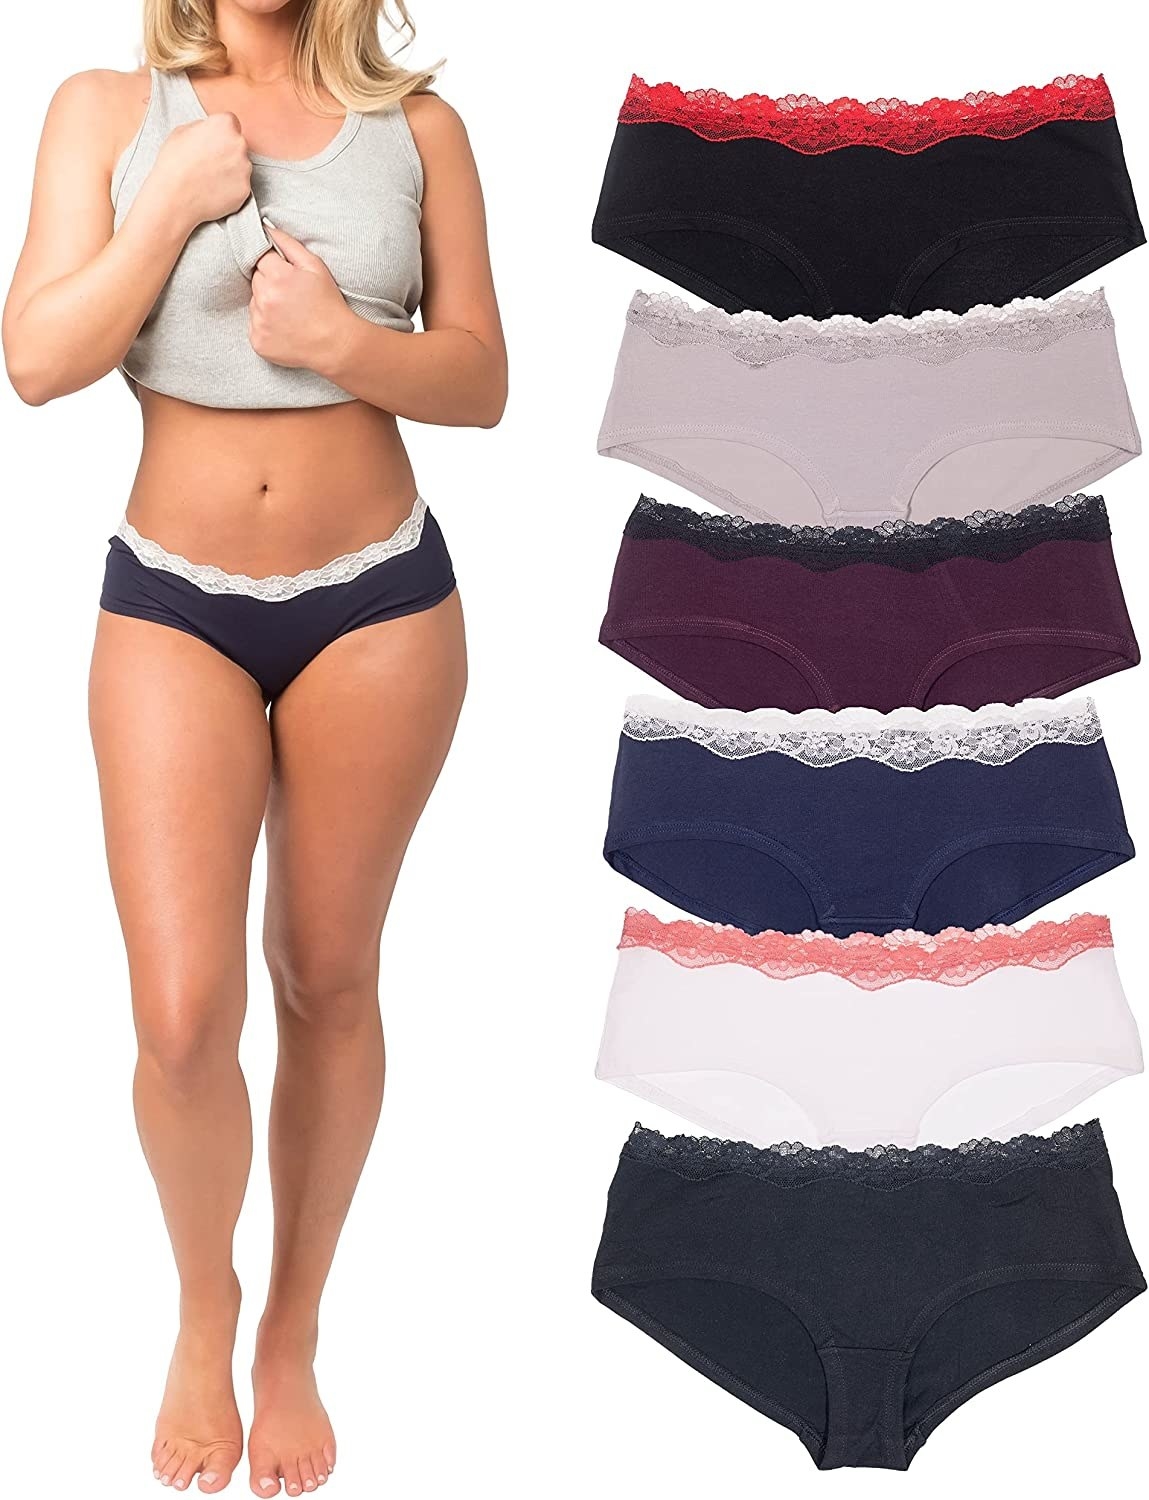 A model wearing the panties in navy and white next to a multicolored pack of them